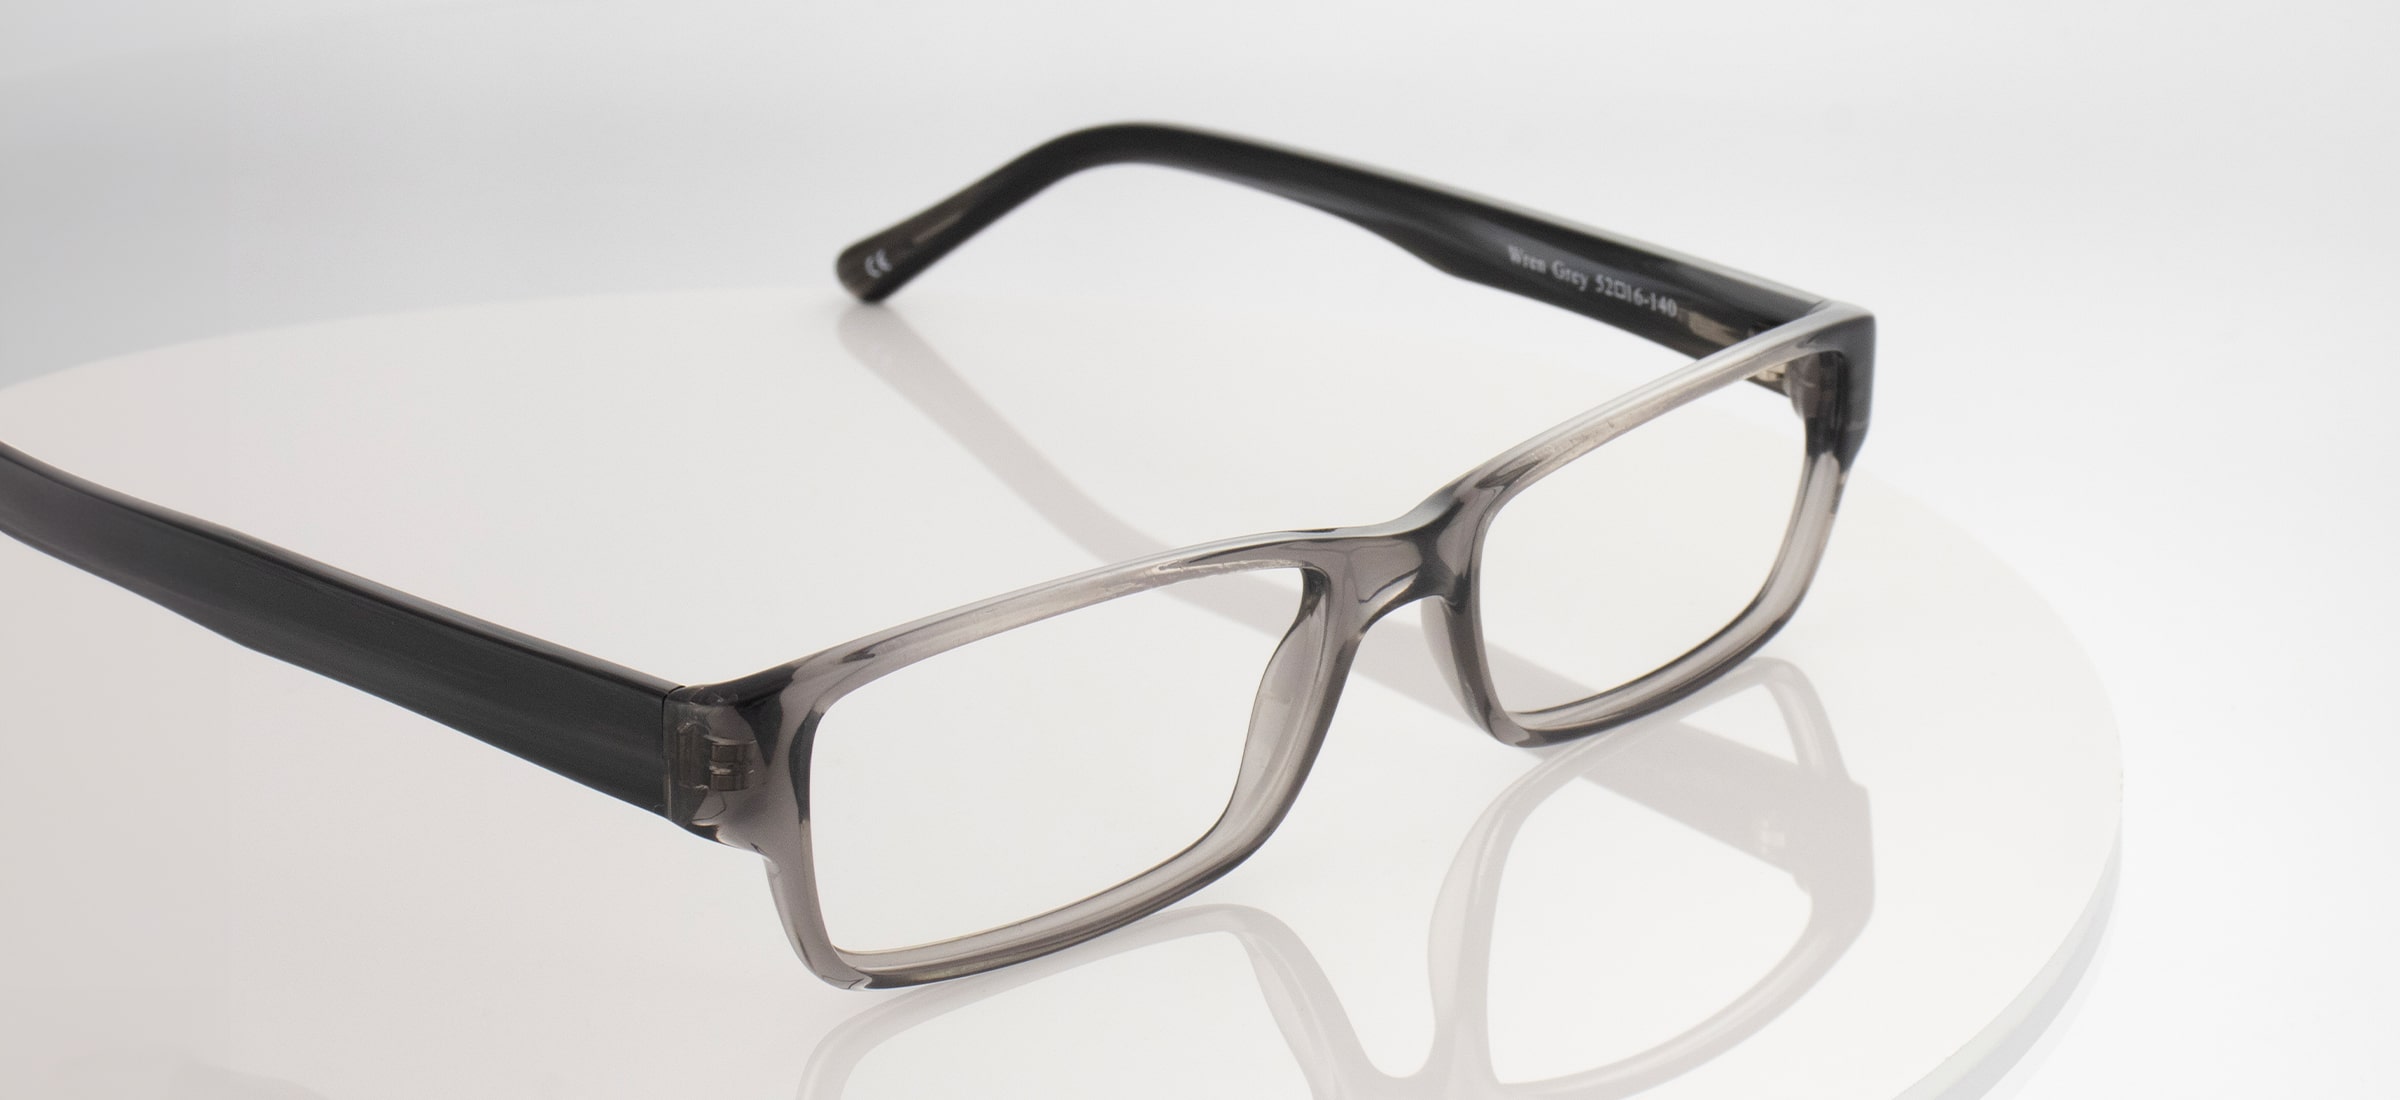 The Collection Wren glasses in grey